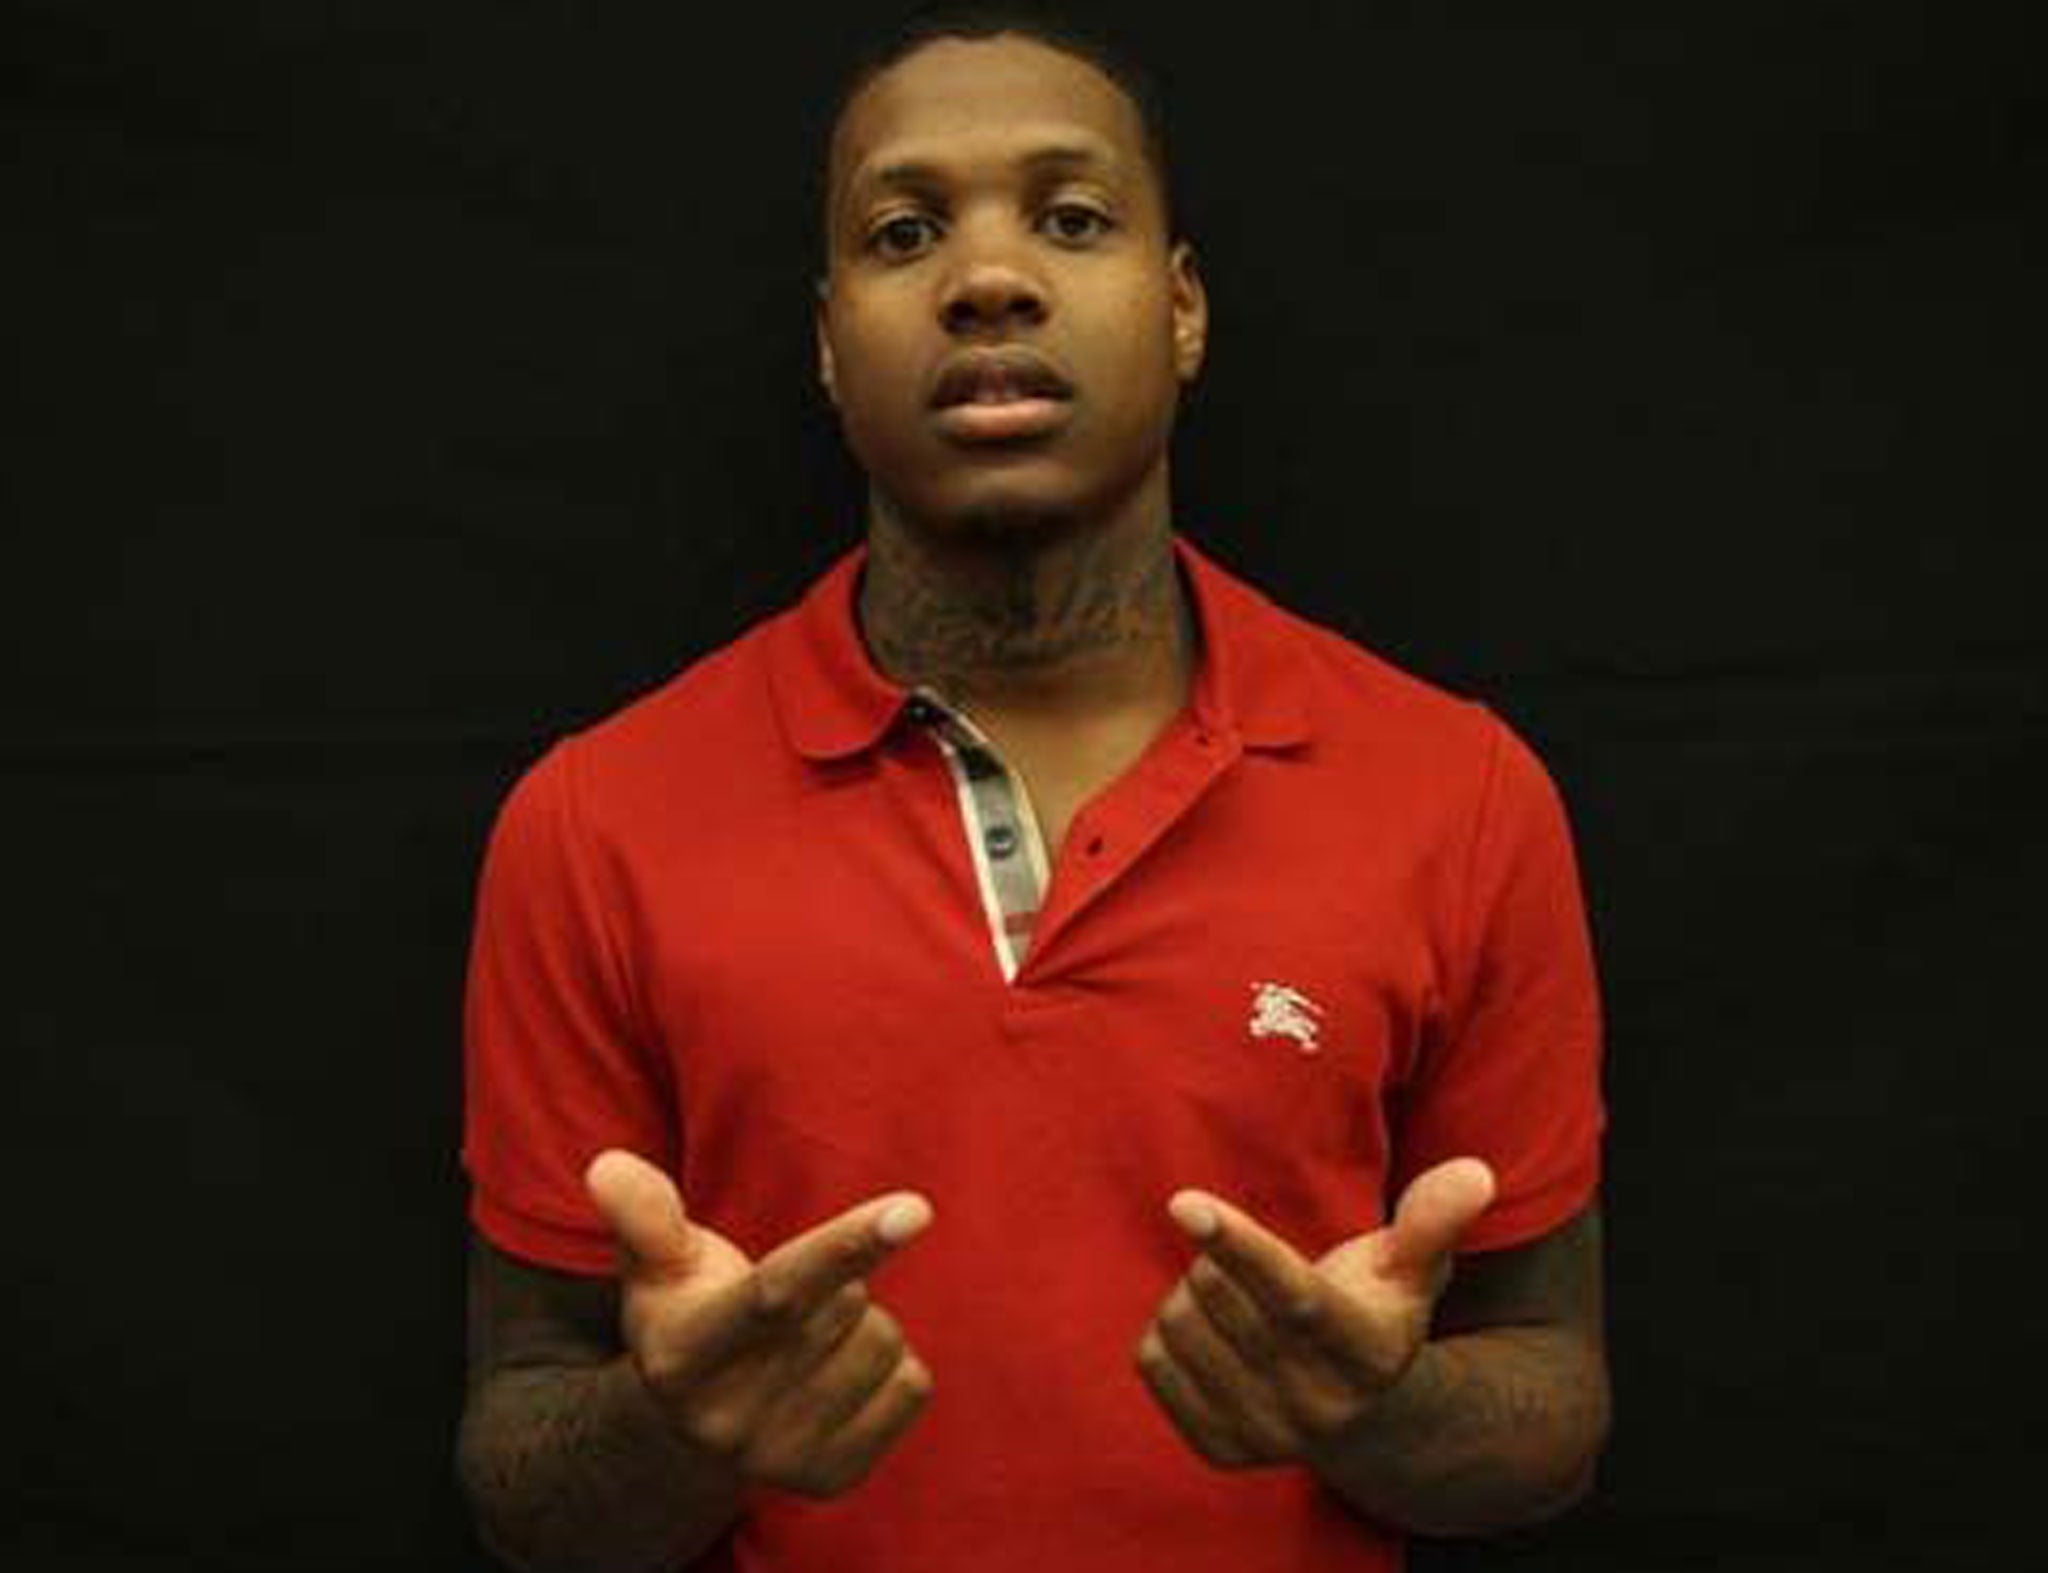 Durk has developed uncompromising hip-hop without releasing an overtly commercial track